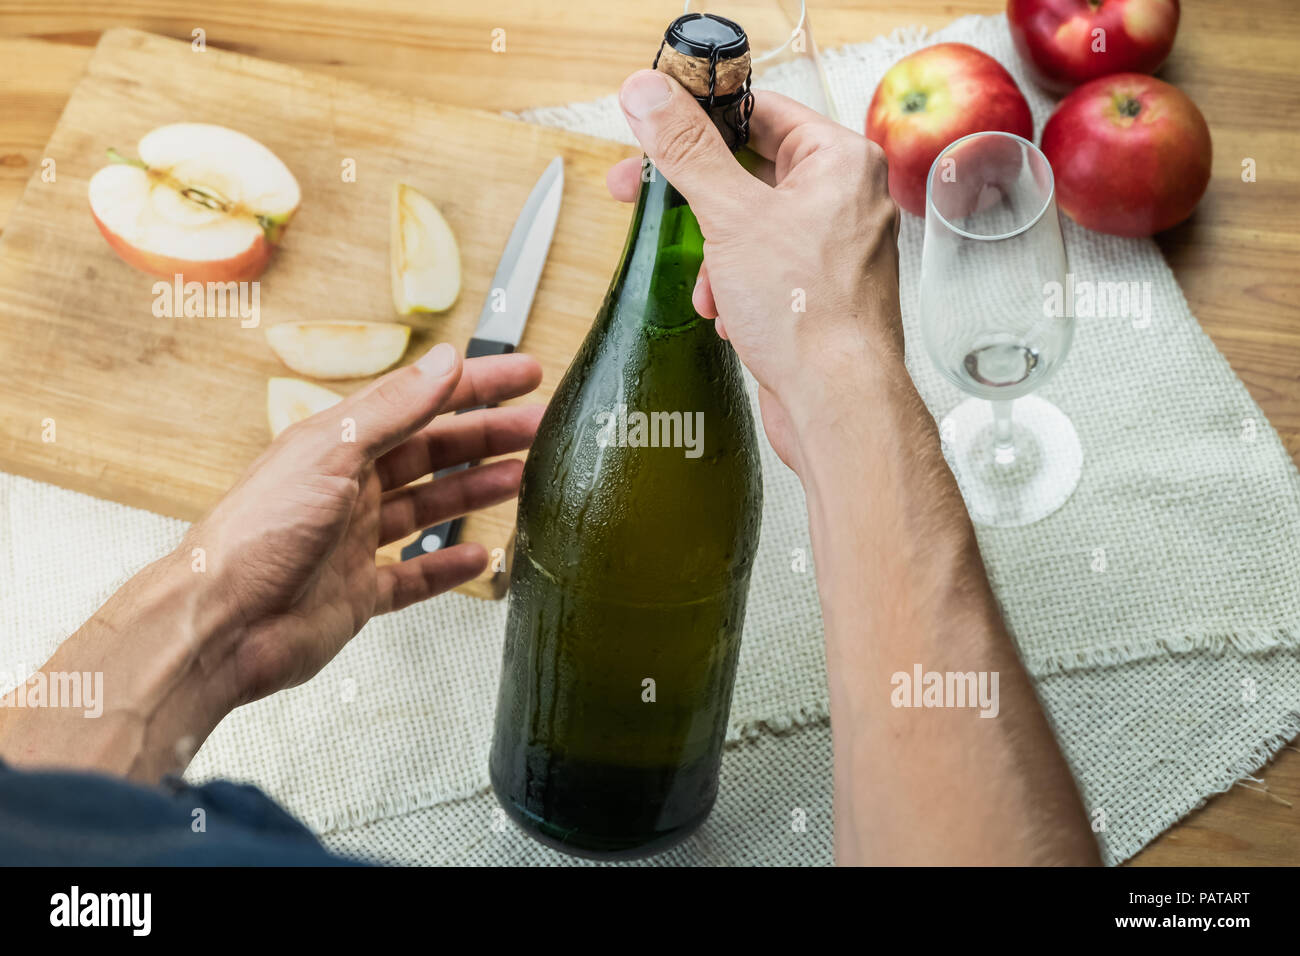 Top view of male hands holding corked bottle of premium cidre. Shot from above with beautiful ice cold bottle of apple wine in man's hands, with local Stock Photo